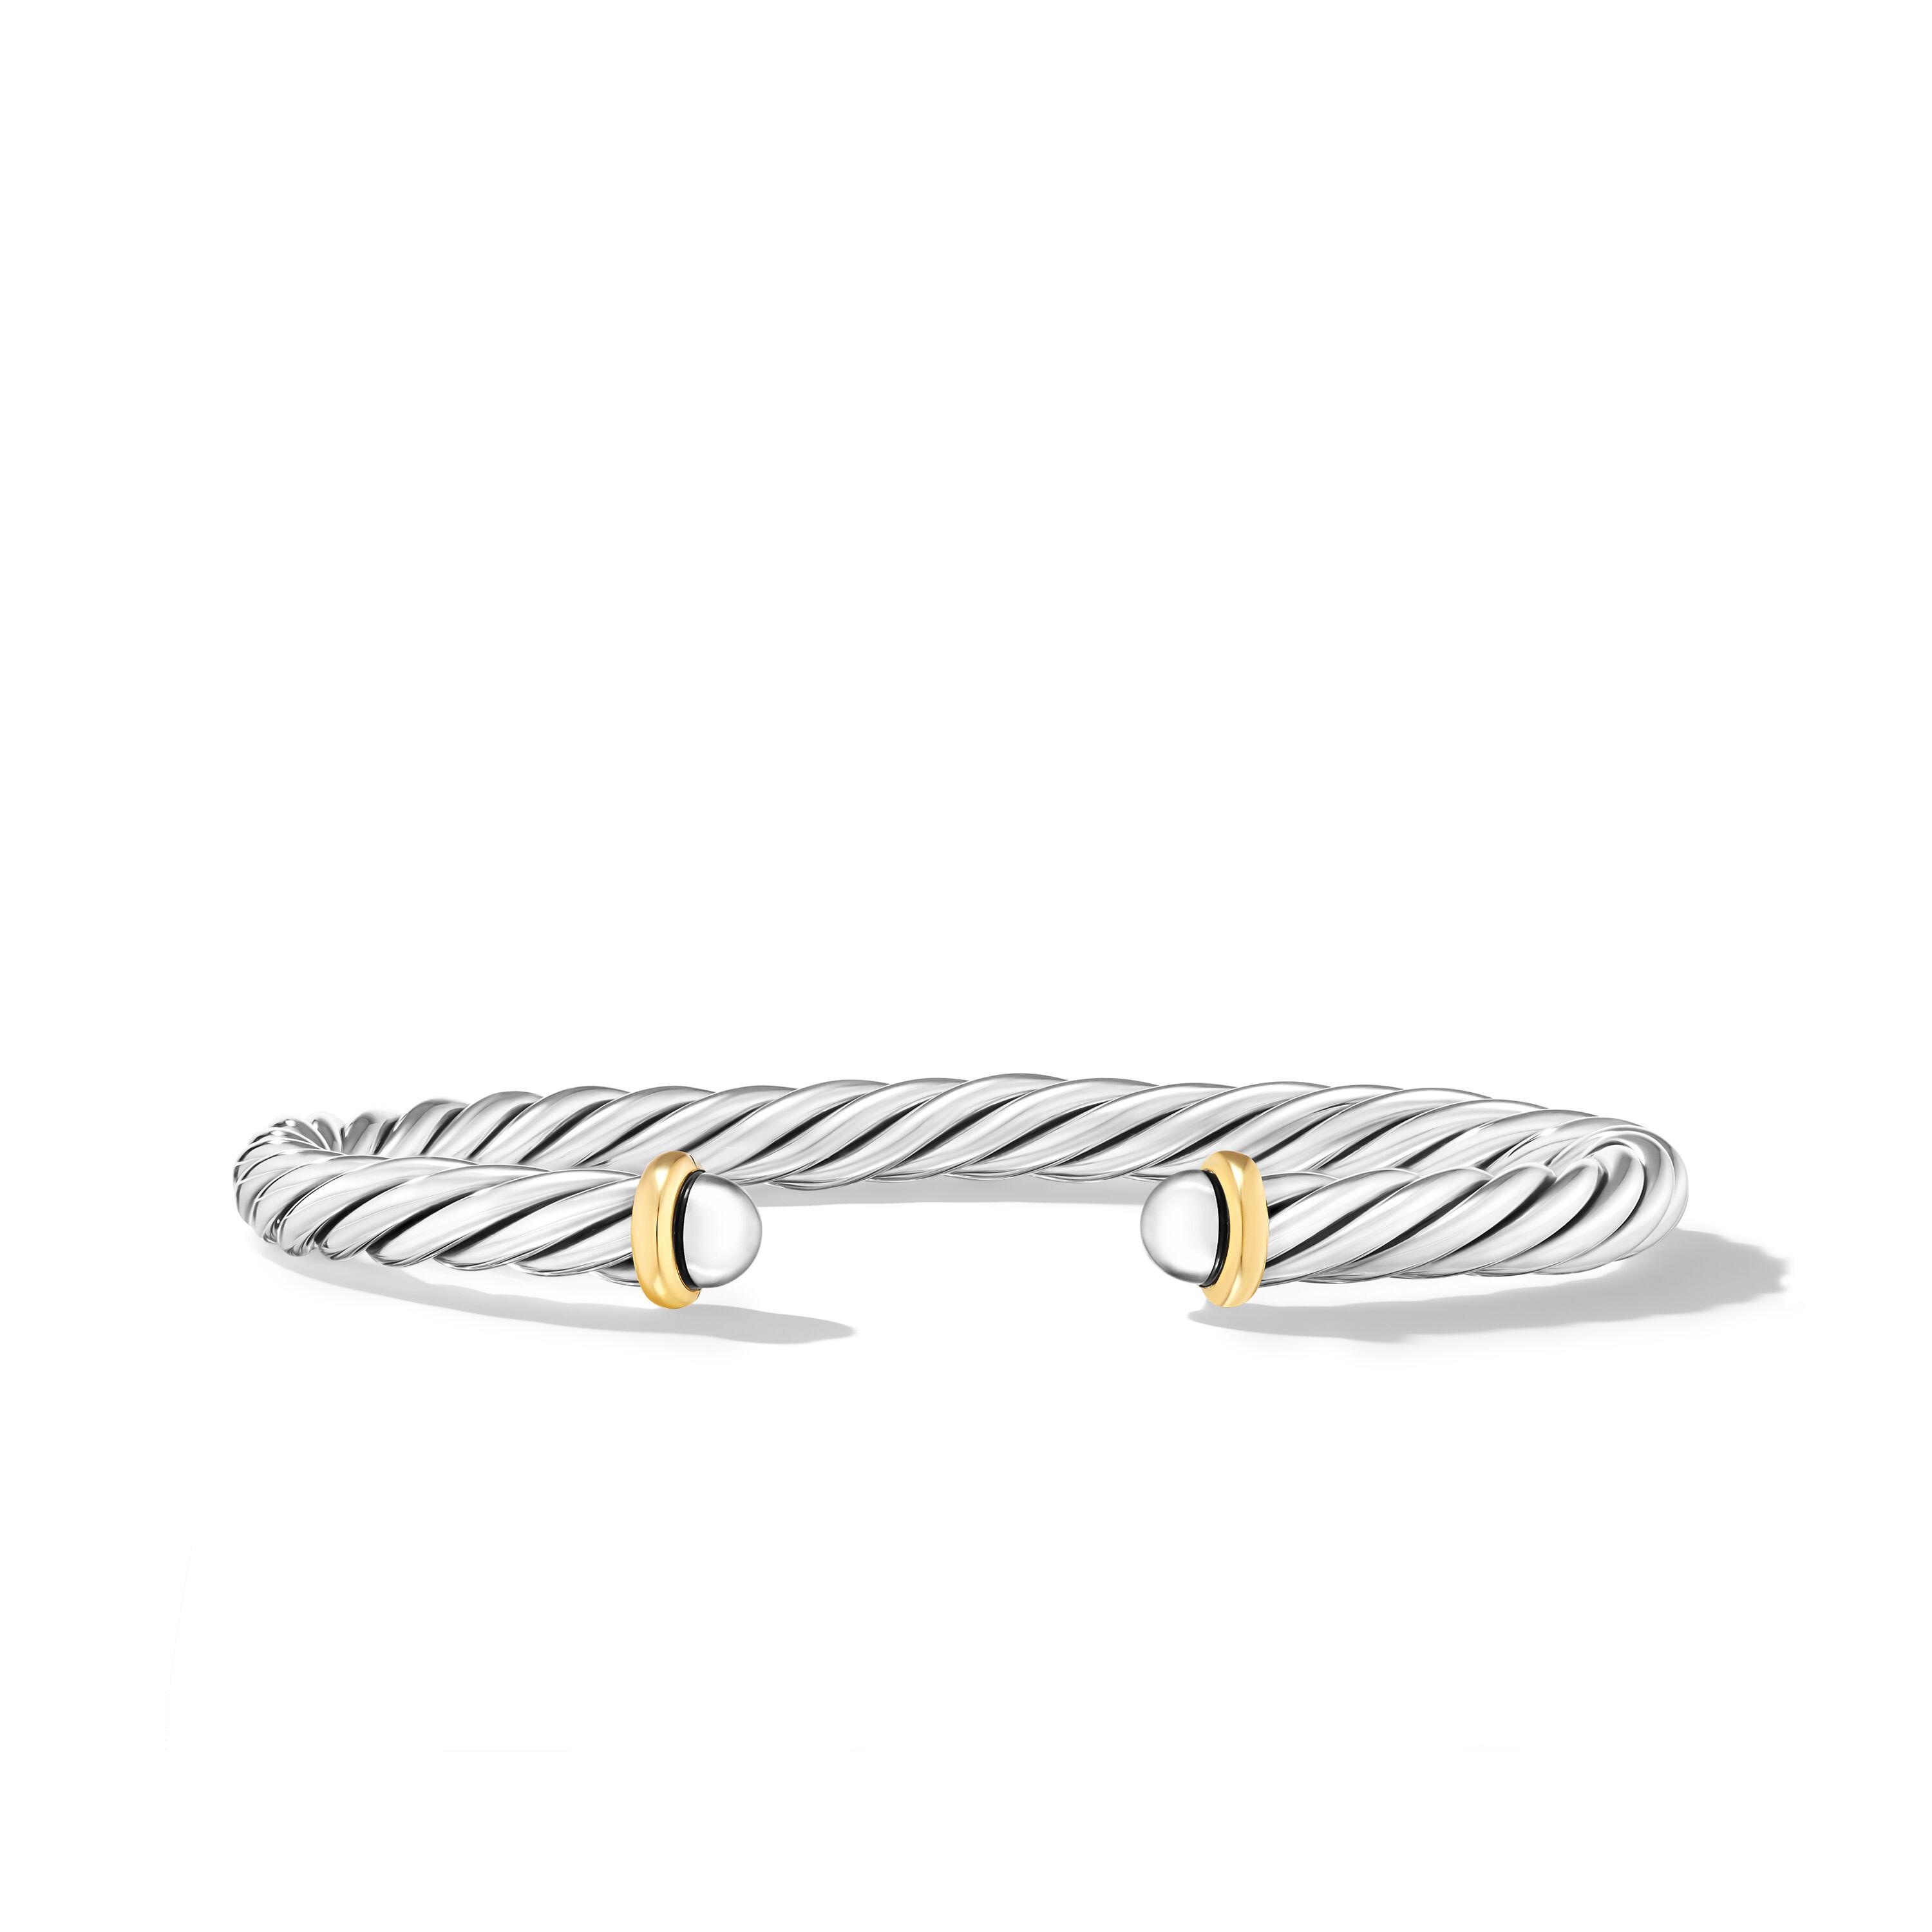 David Yurman 6mm Cable Cuff Bracelet in Sterling Silver with 14K Yellow Gold, Medium 0